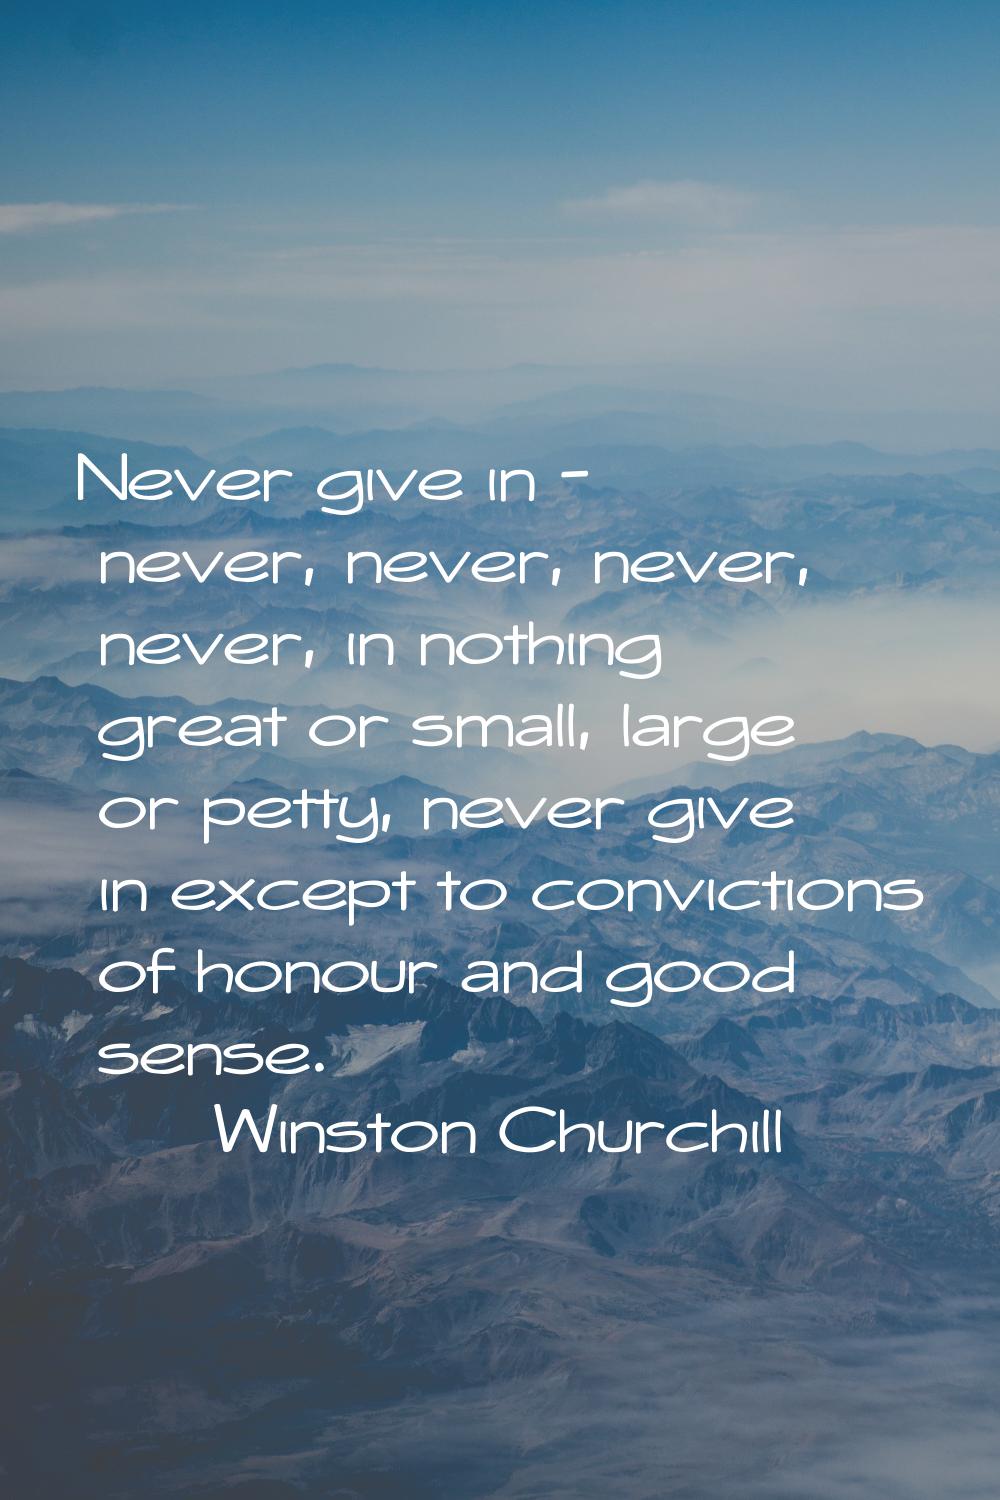 Never give in - never, never, never, never, in nothing great or small, large or petty, never give i